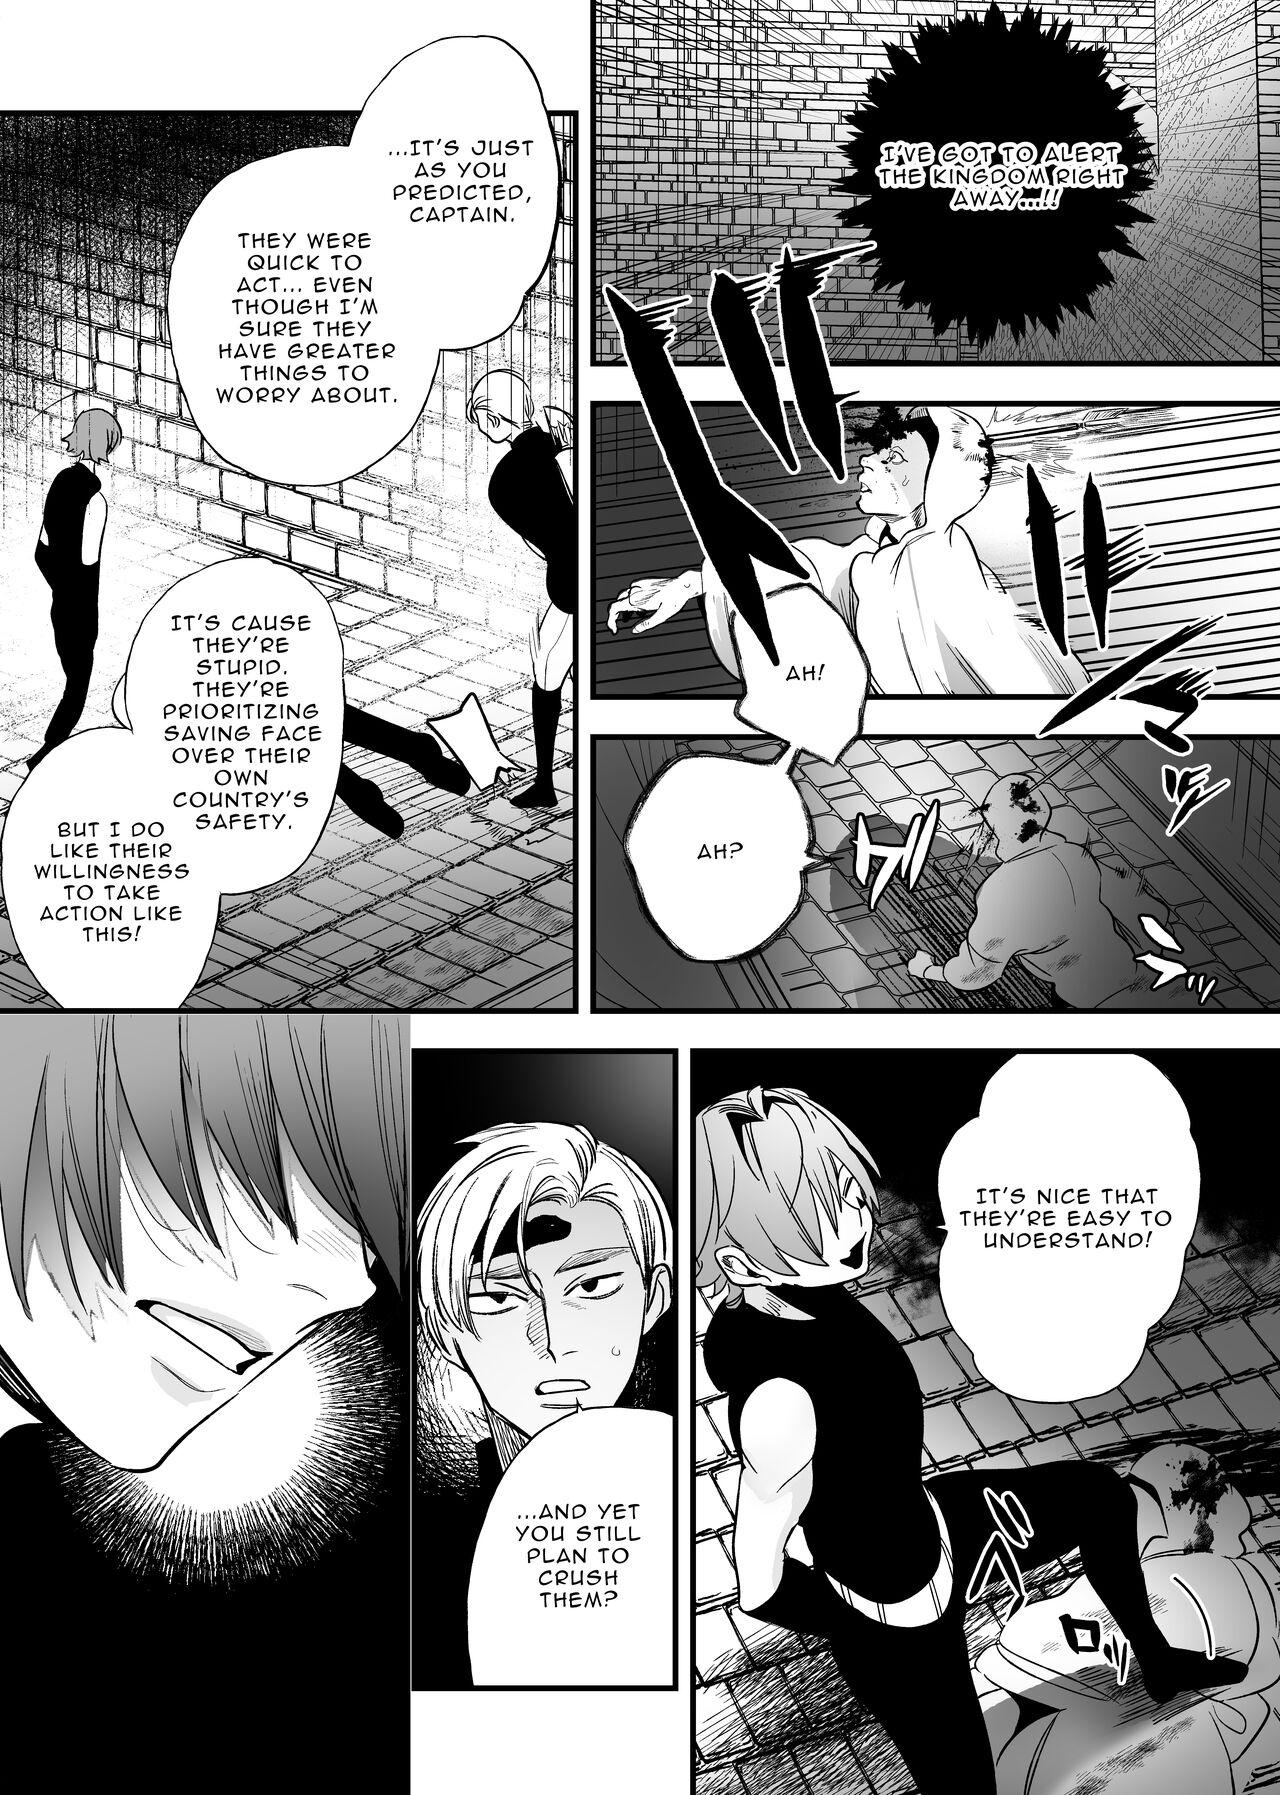 Lesbiansex The Man Who Saved Me on my Isekai Trip was a Killer... 2 - Original This - Page 4